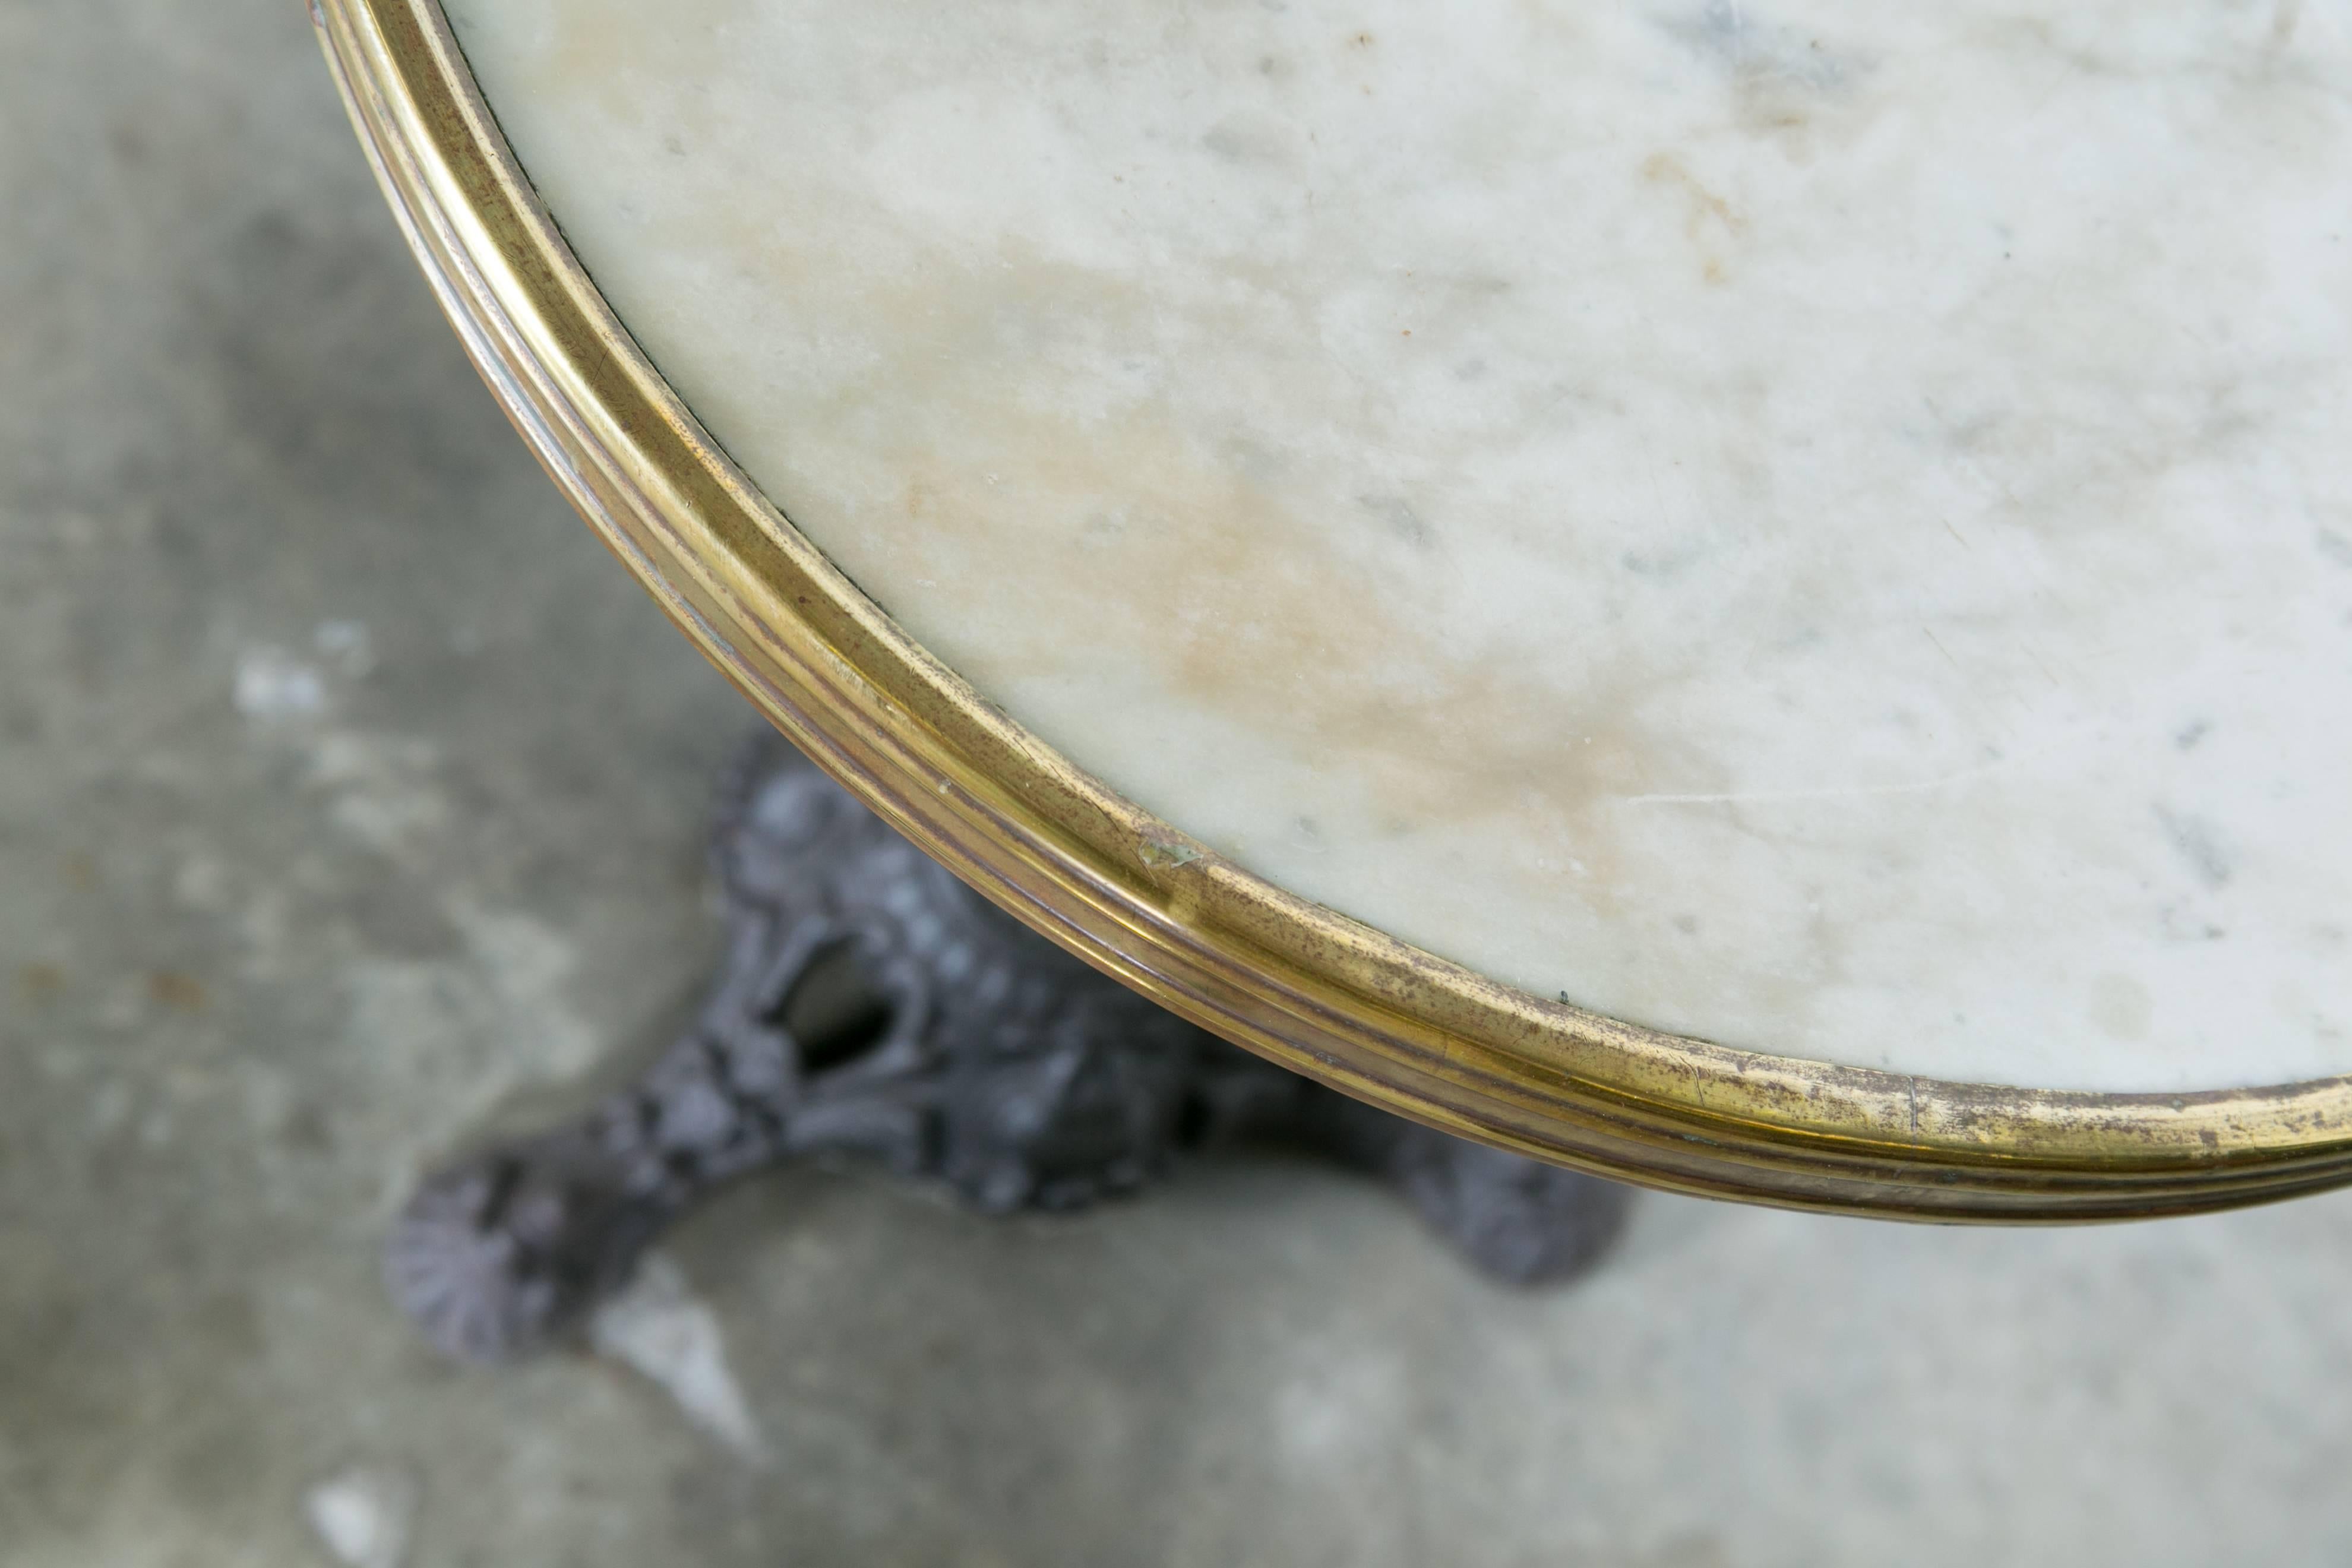 french bistro table marble top